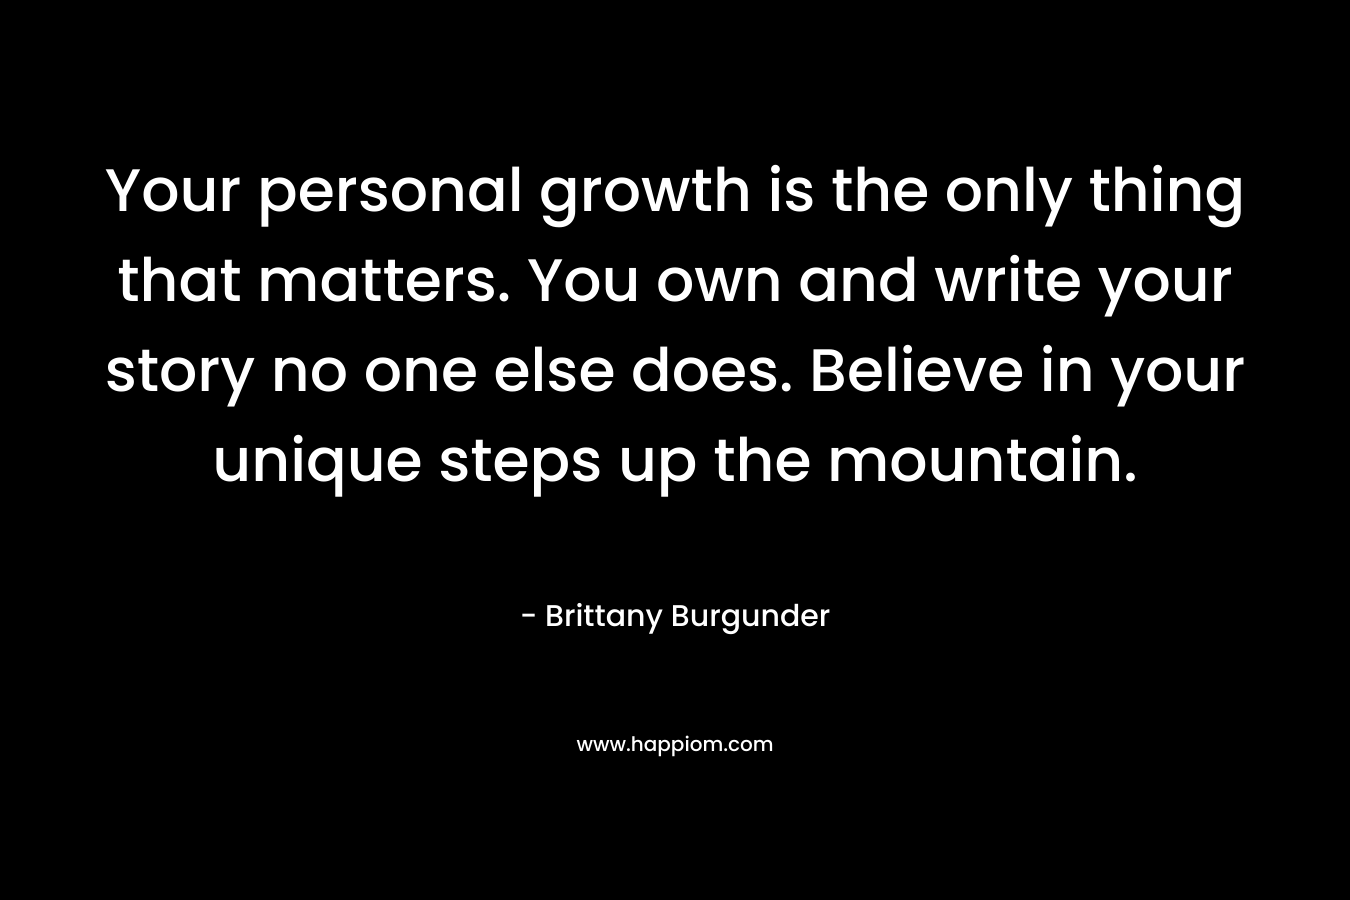 Your personal growth is the only thing that matters. You own and write your story no one else does. Believe in your unique steps up the mountain. 